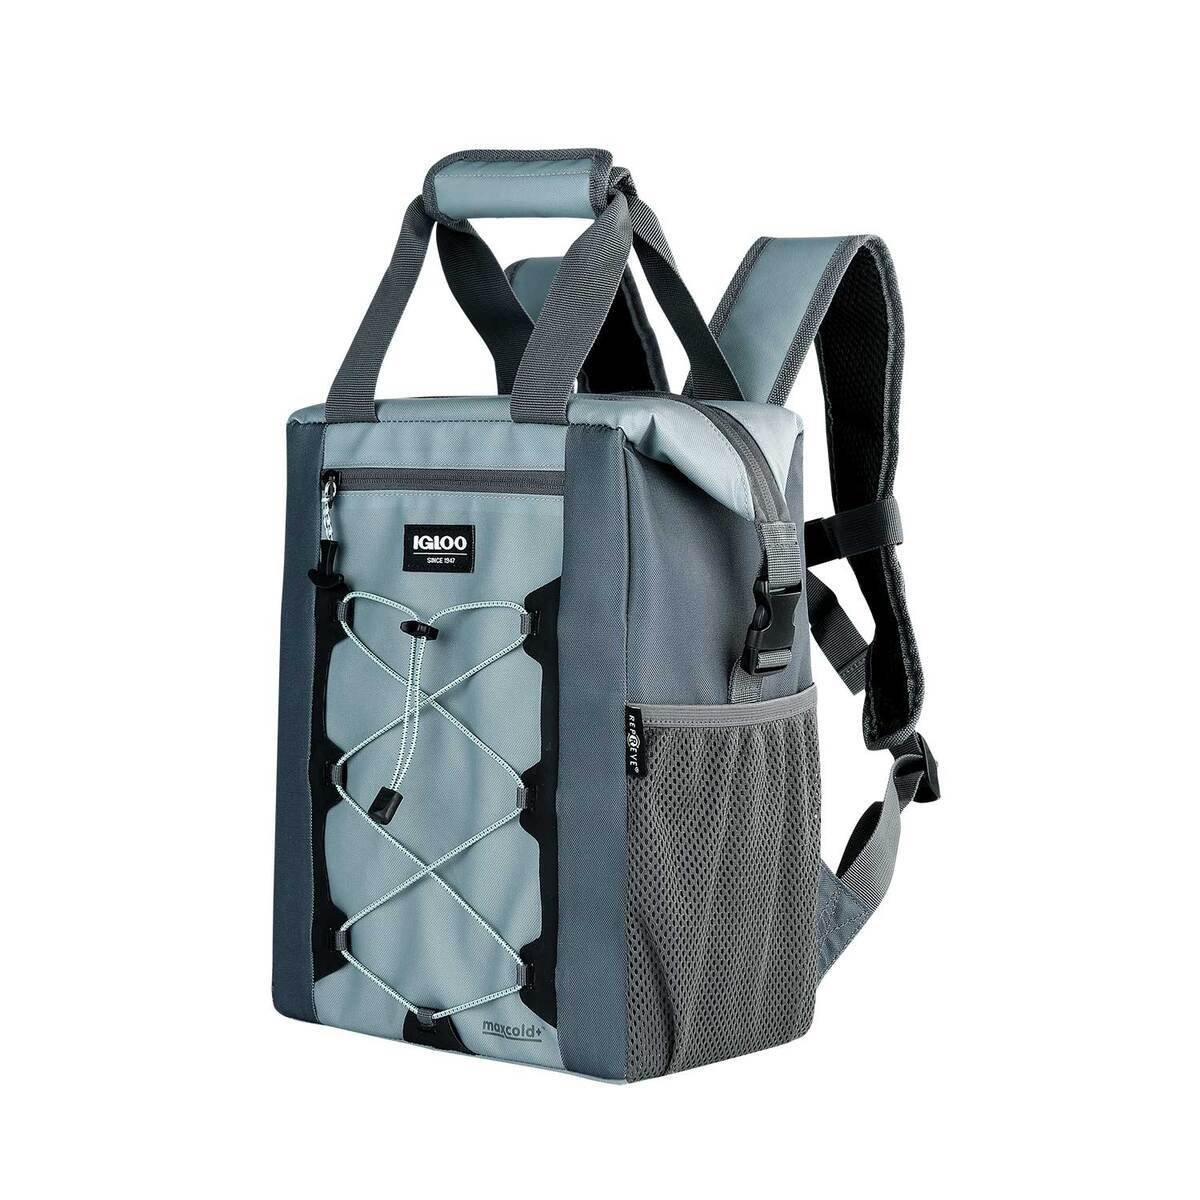 Igloo Core Gray & Black 24-Can Cooler Backpack